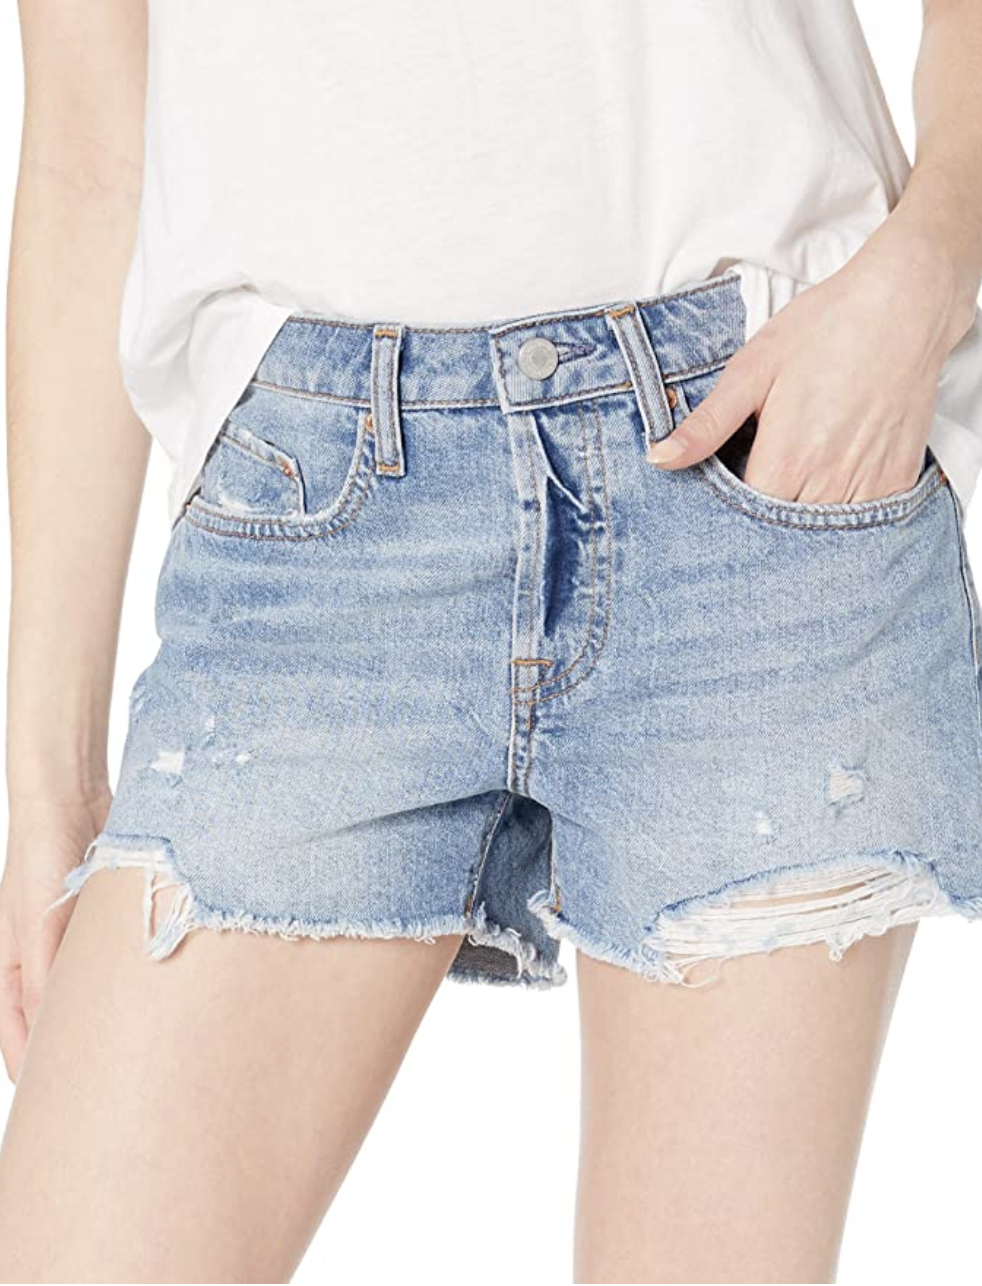 These shorts are gonna sell out again so go quick! They are on my Amaz, Denim Shorts